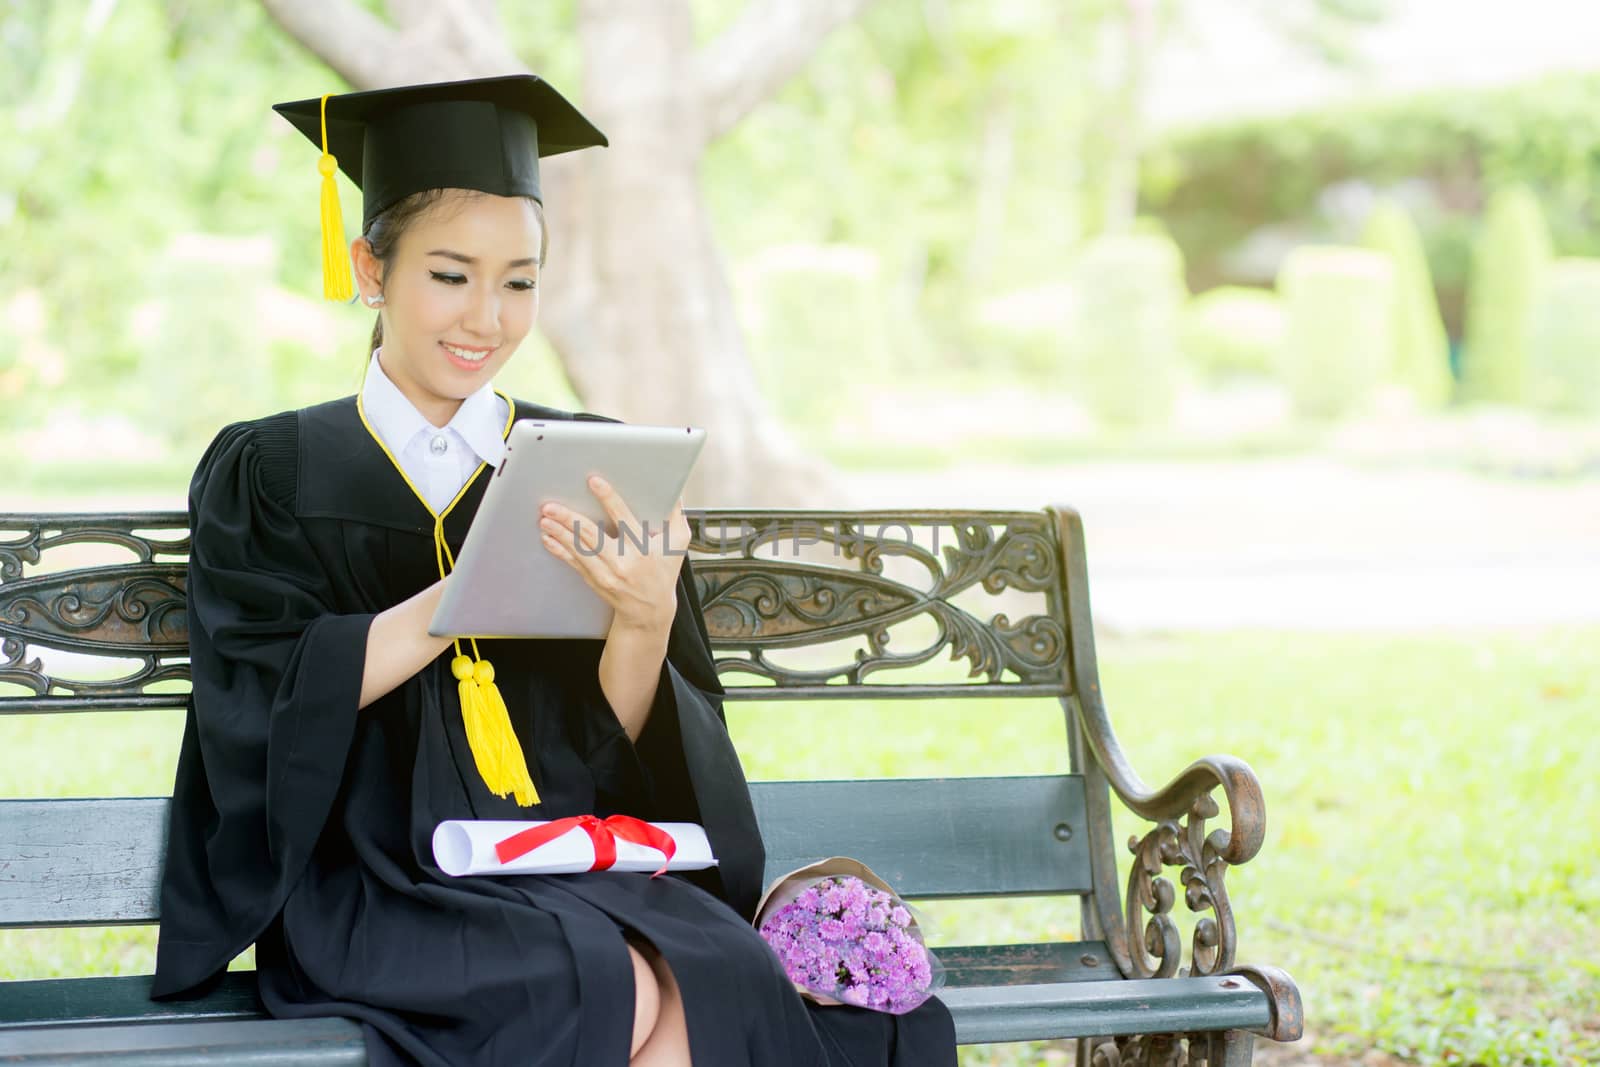 Graduate playing tablet in her hand feeling relaxing and so happiness in commencement day and search job new